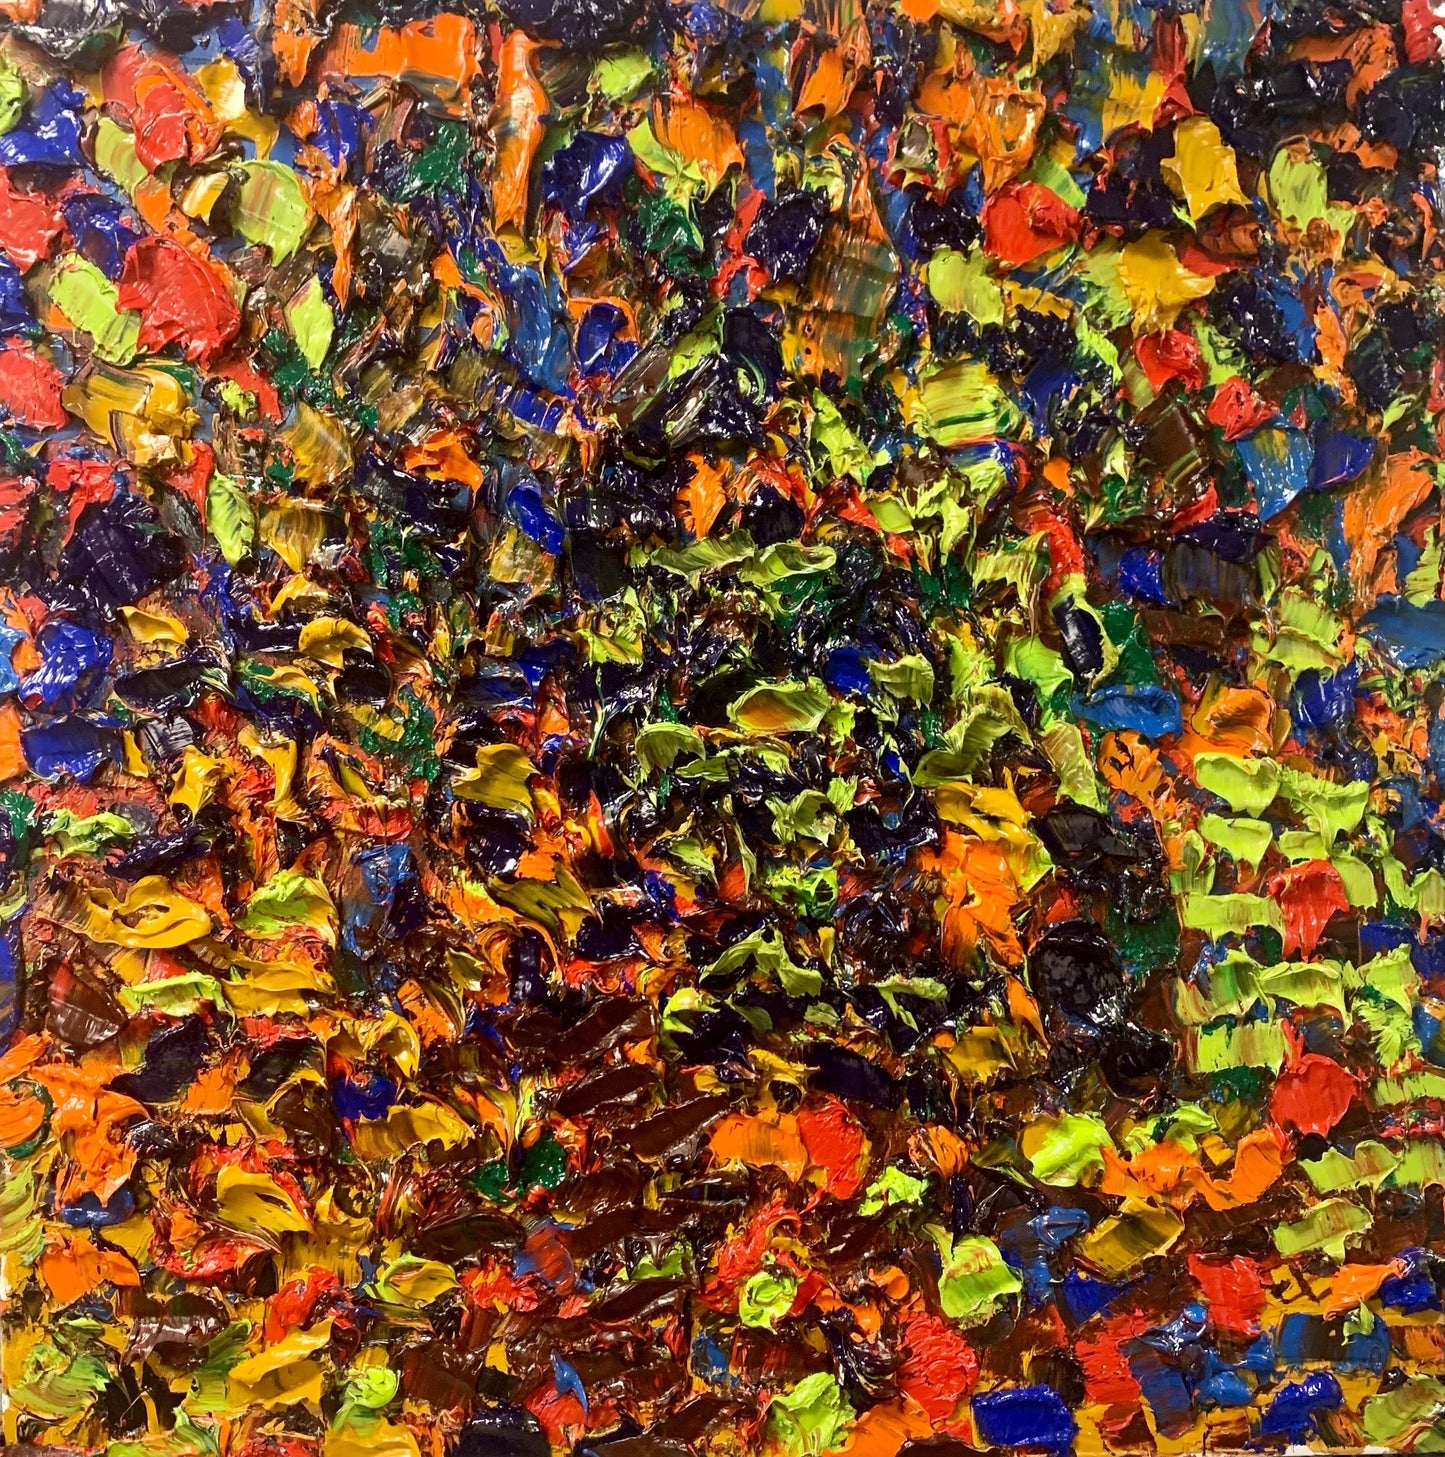 Beautiful Autumn Leaves, 36"x36" Oil On Canvas, Sold 2020